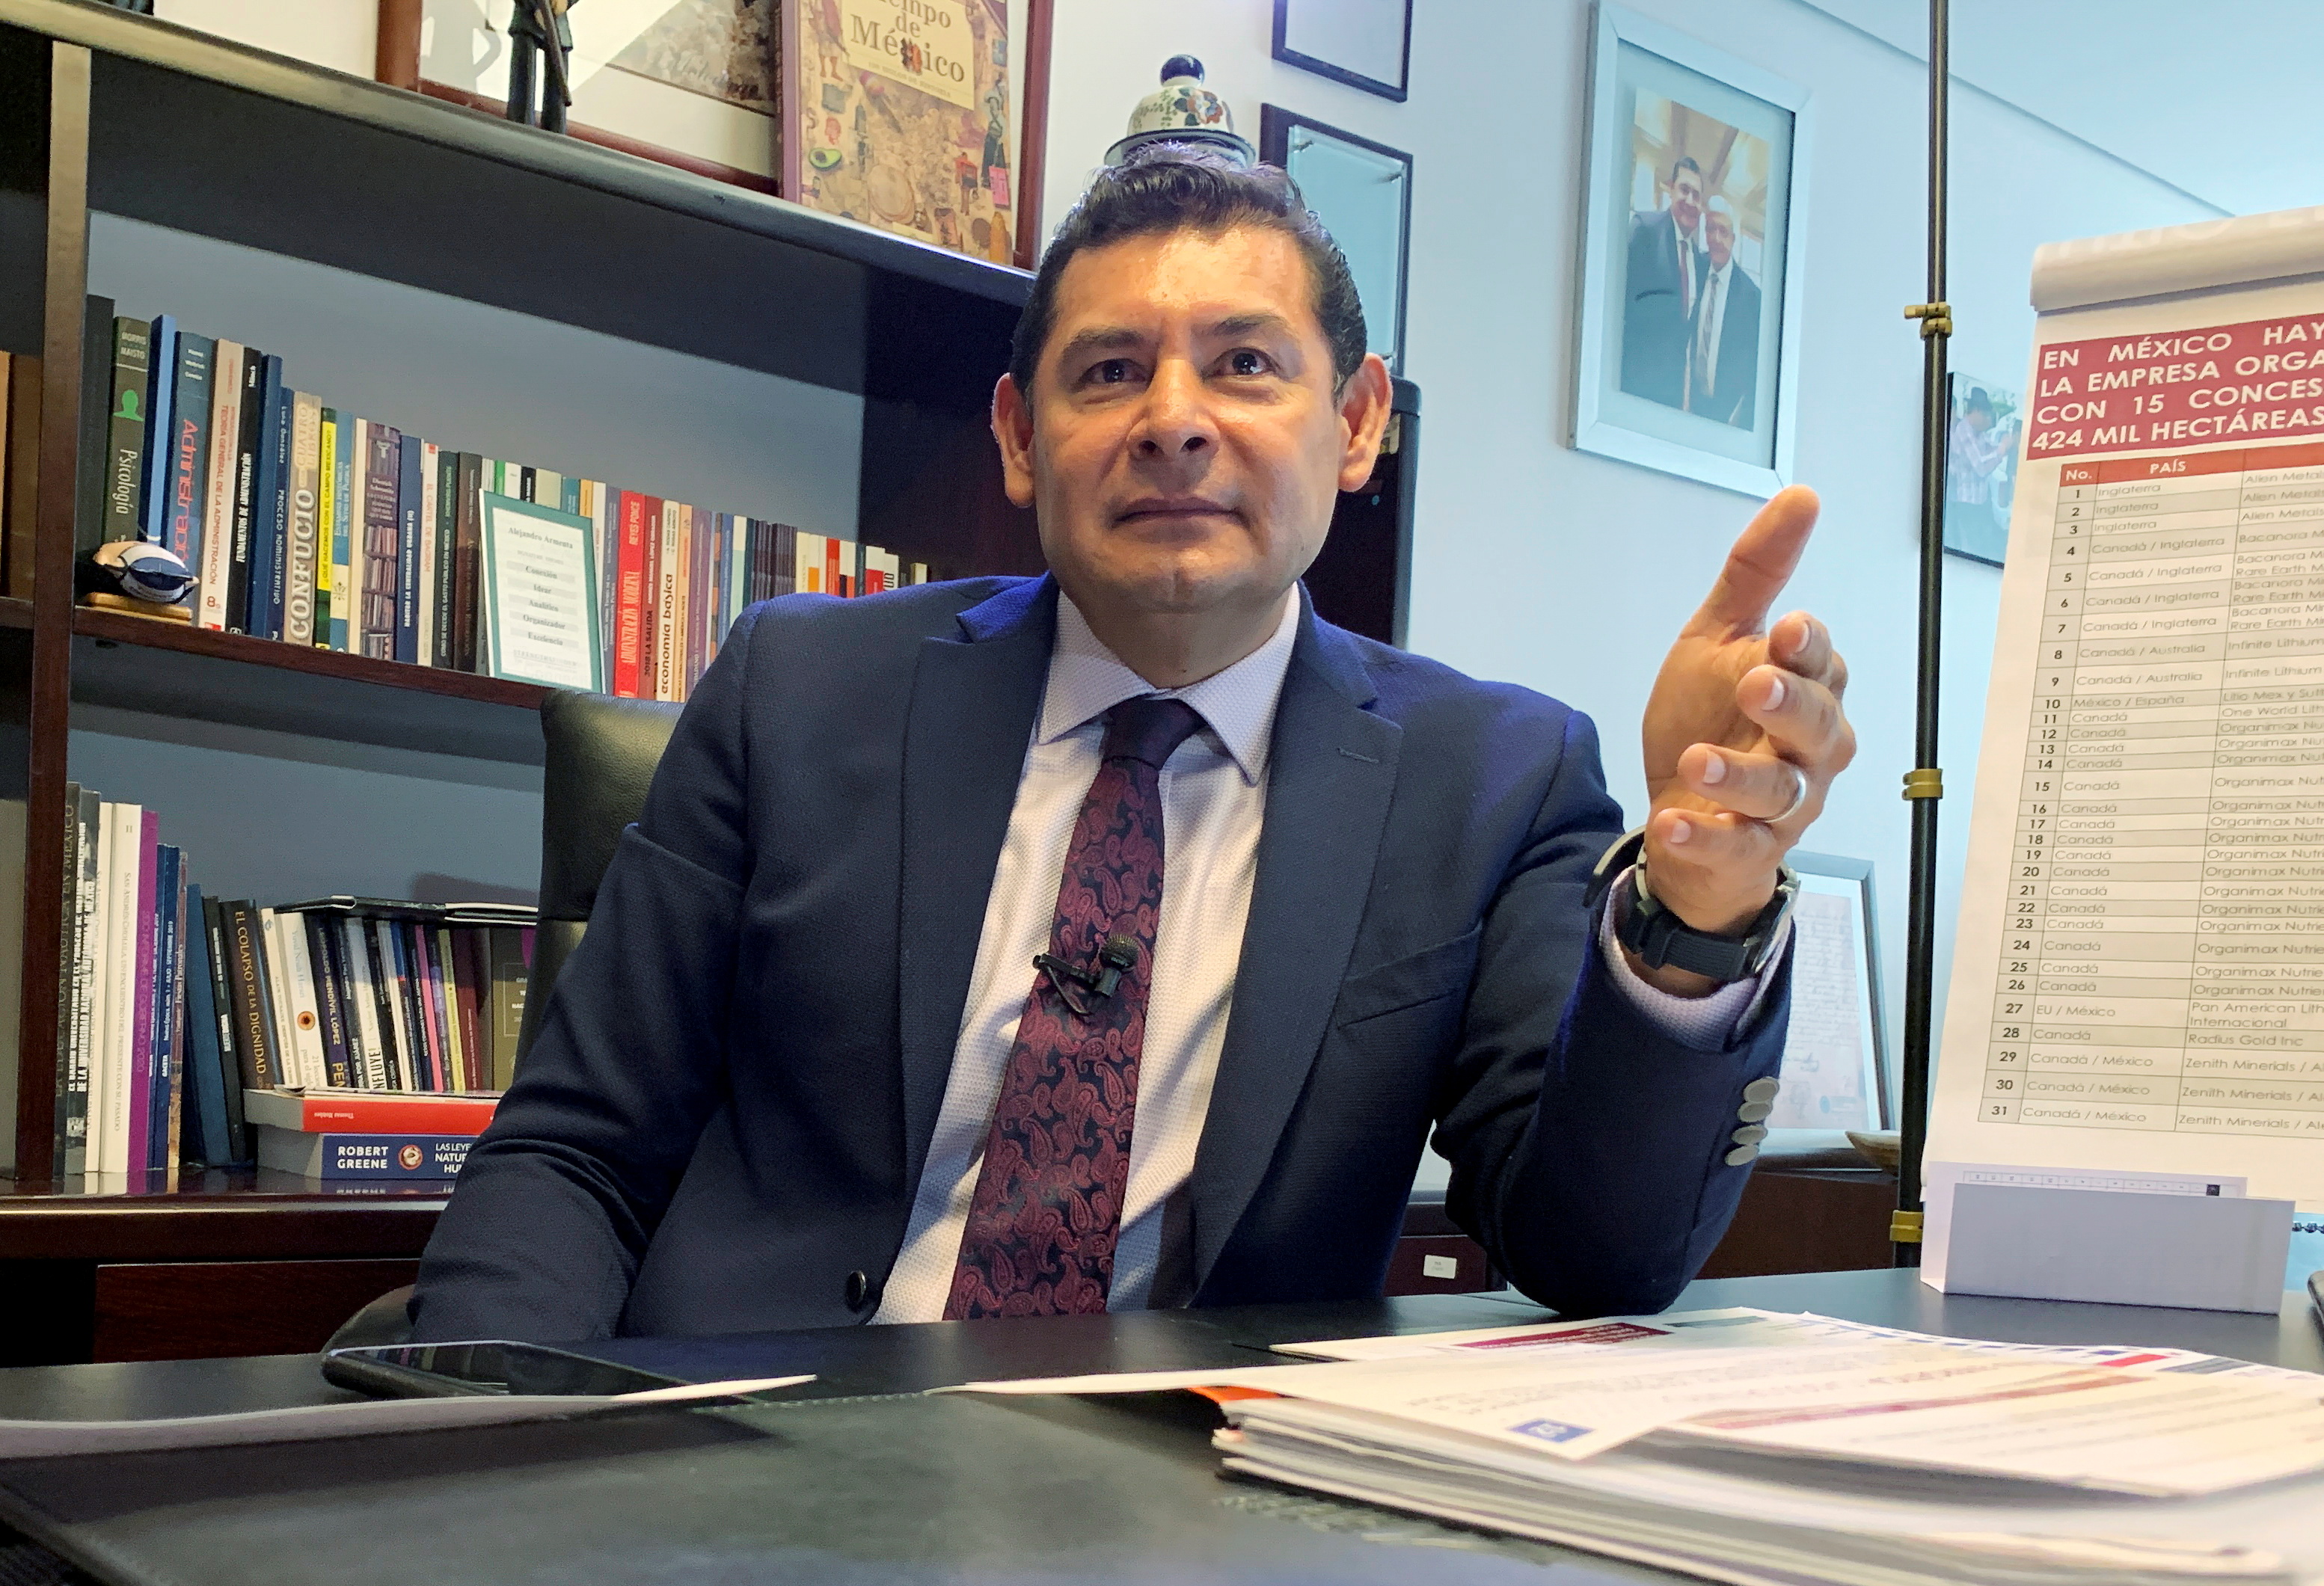 Interview with Senator Alejandro Armenta Mier at his office in Mexico City